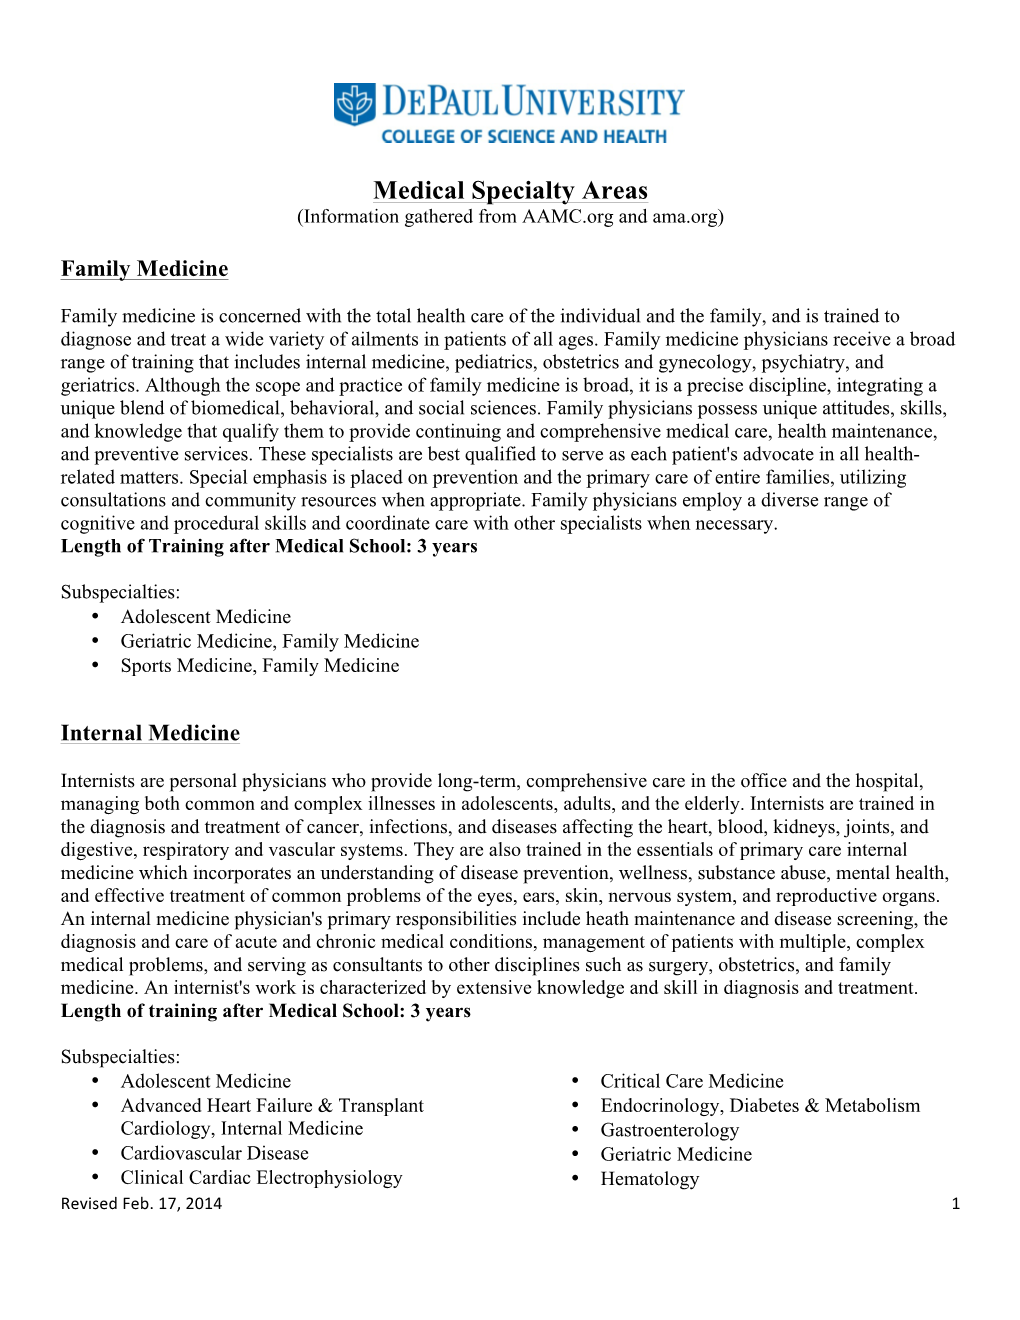 Medical Specialty Areas (Information Gathered from AAMC.Org and Ama.Org)